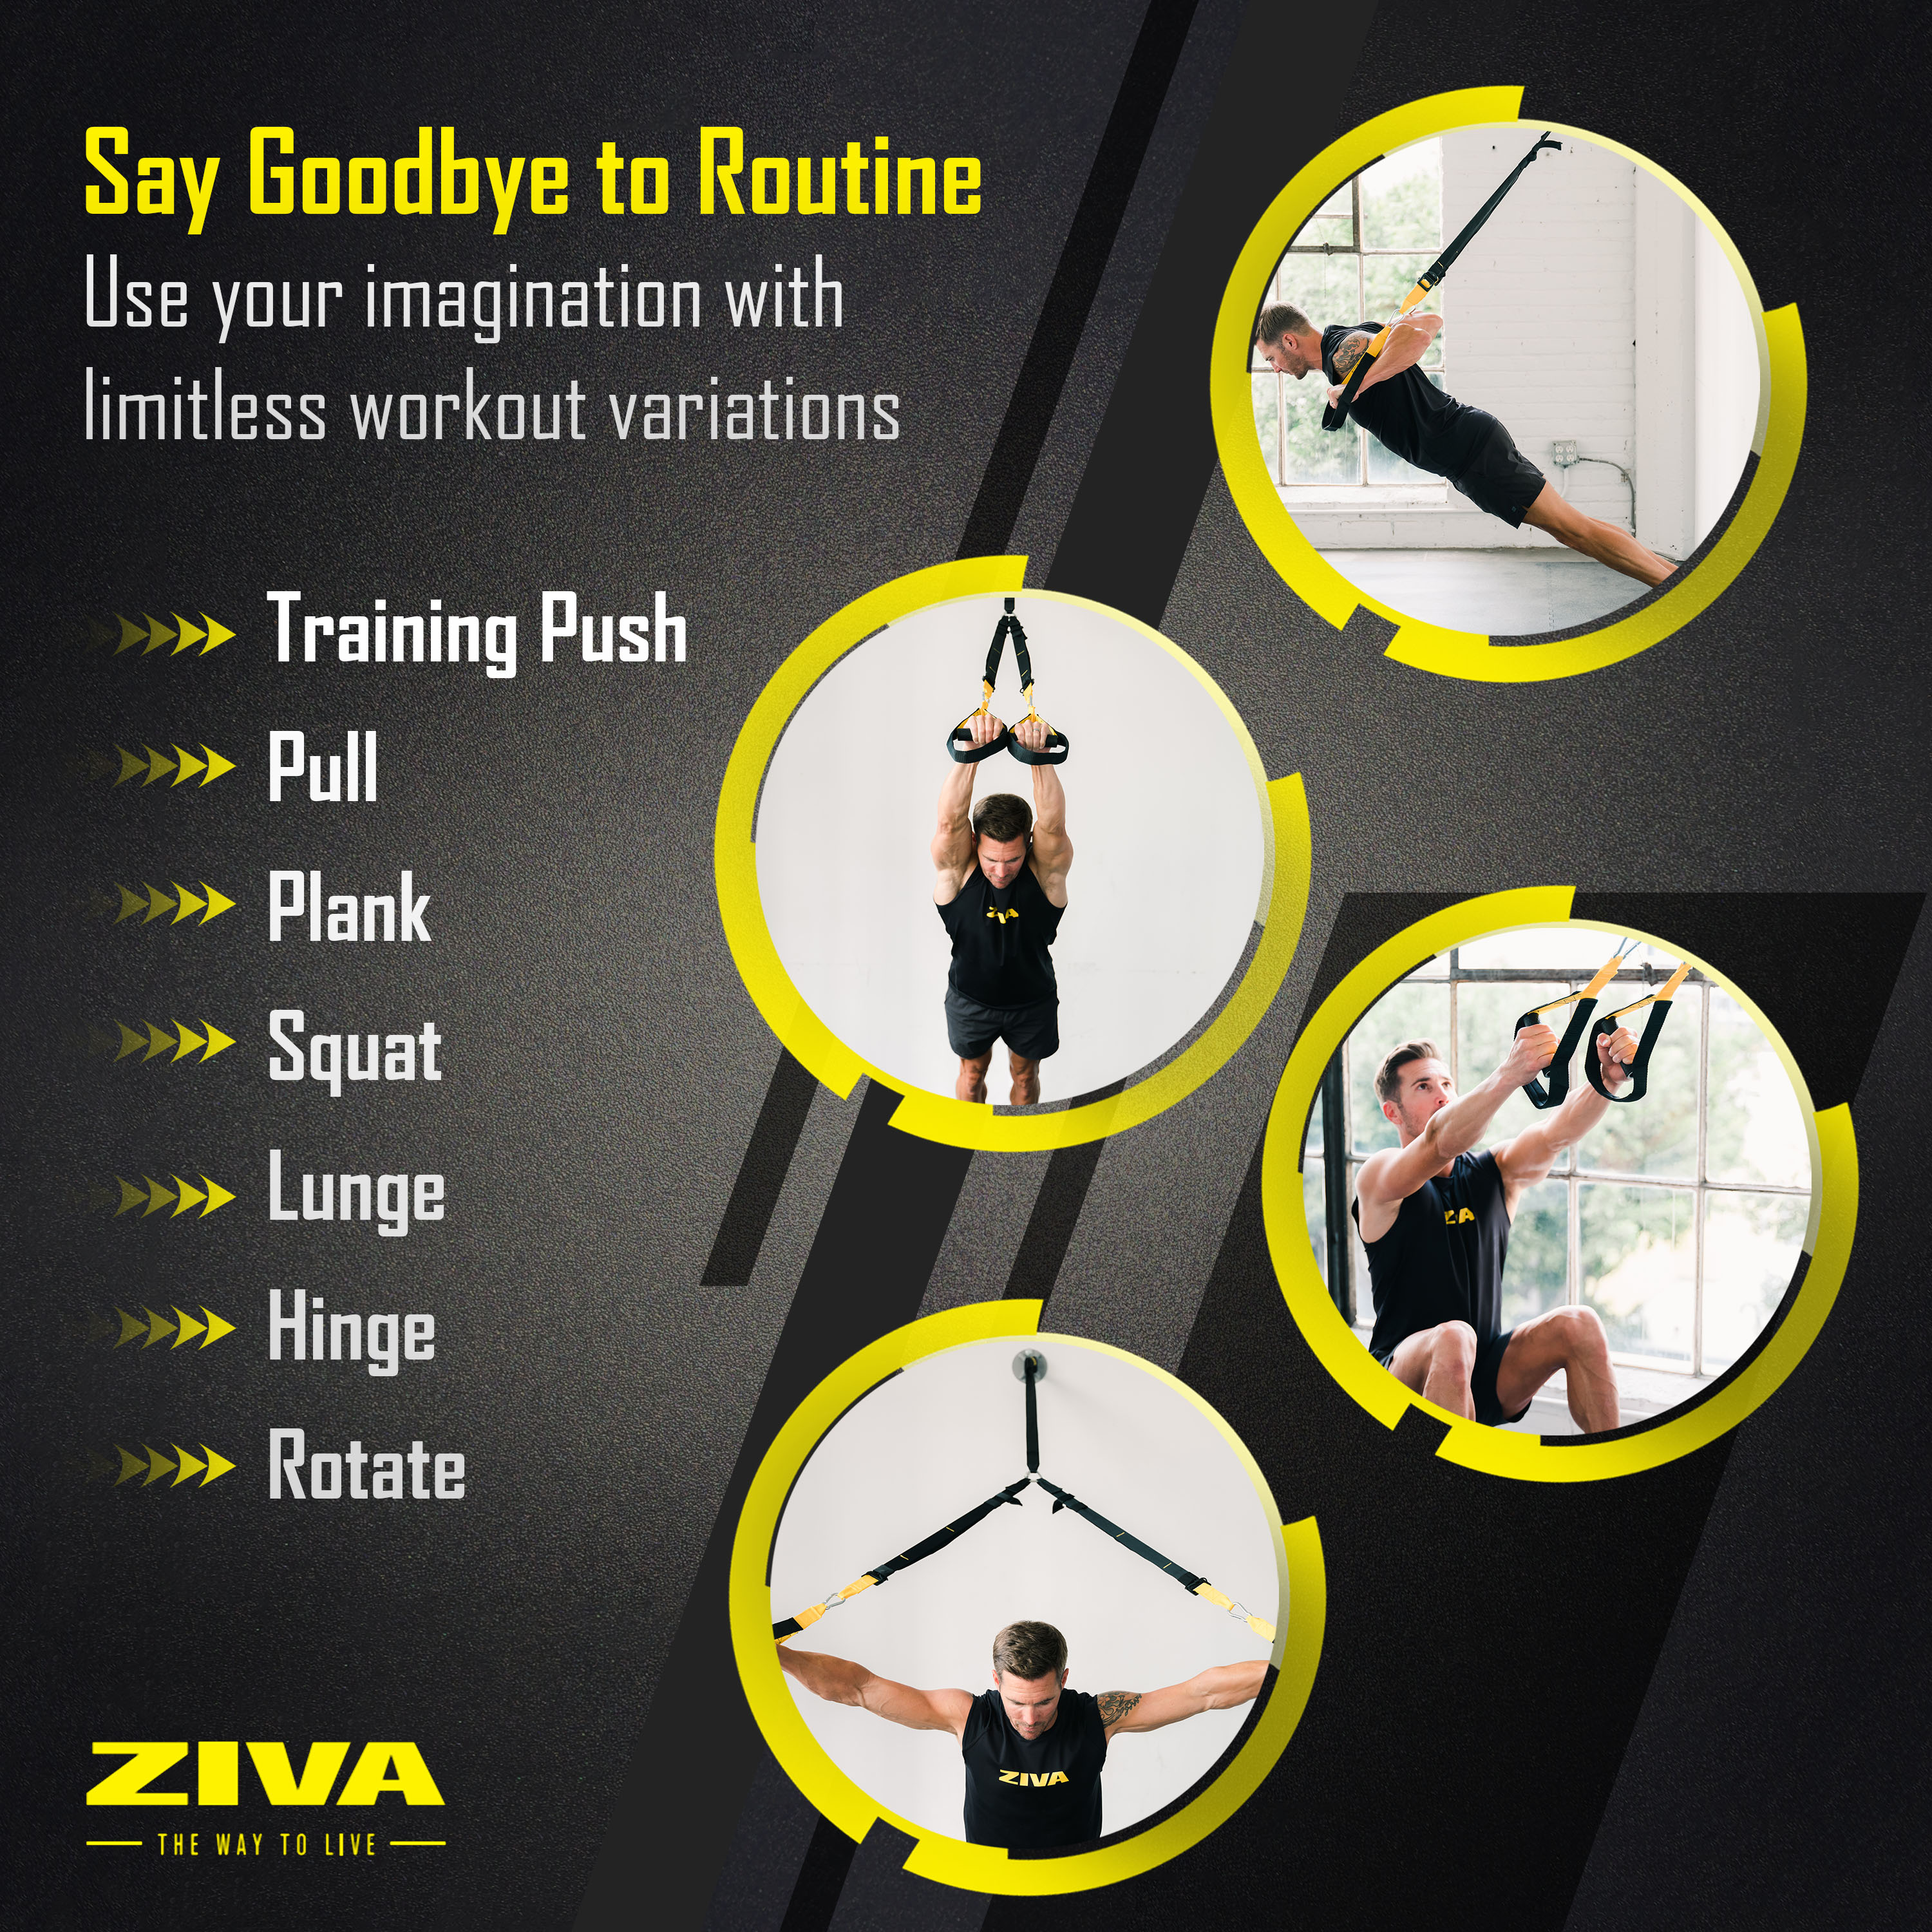 Say goodbye to routine. Use your imagination with limitless workout variations. Training push. Pull. Plank. Squat.Lunge. Hinge. Rotate.